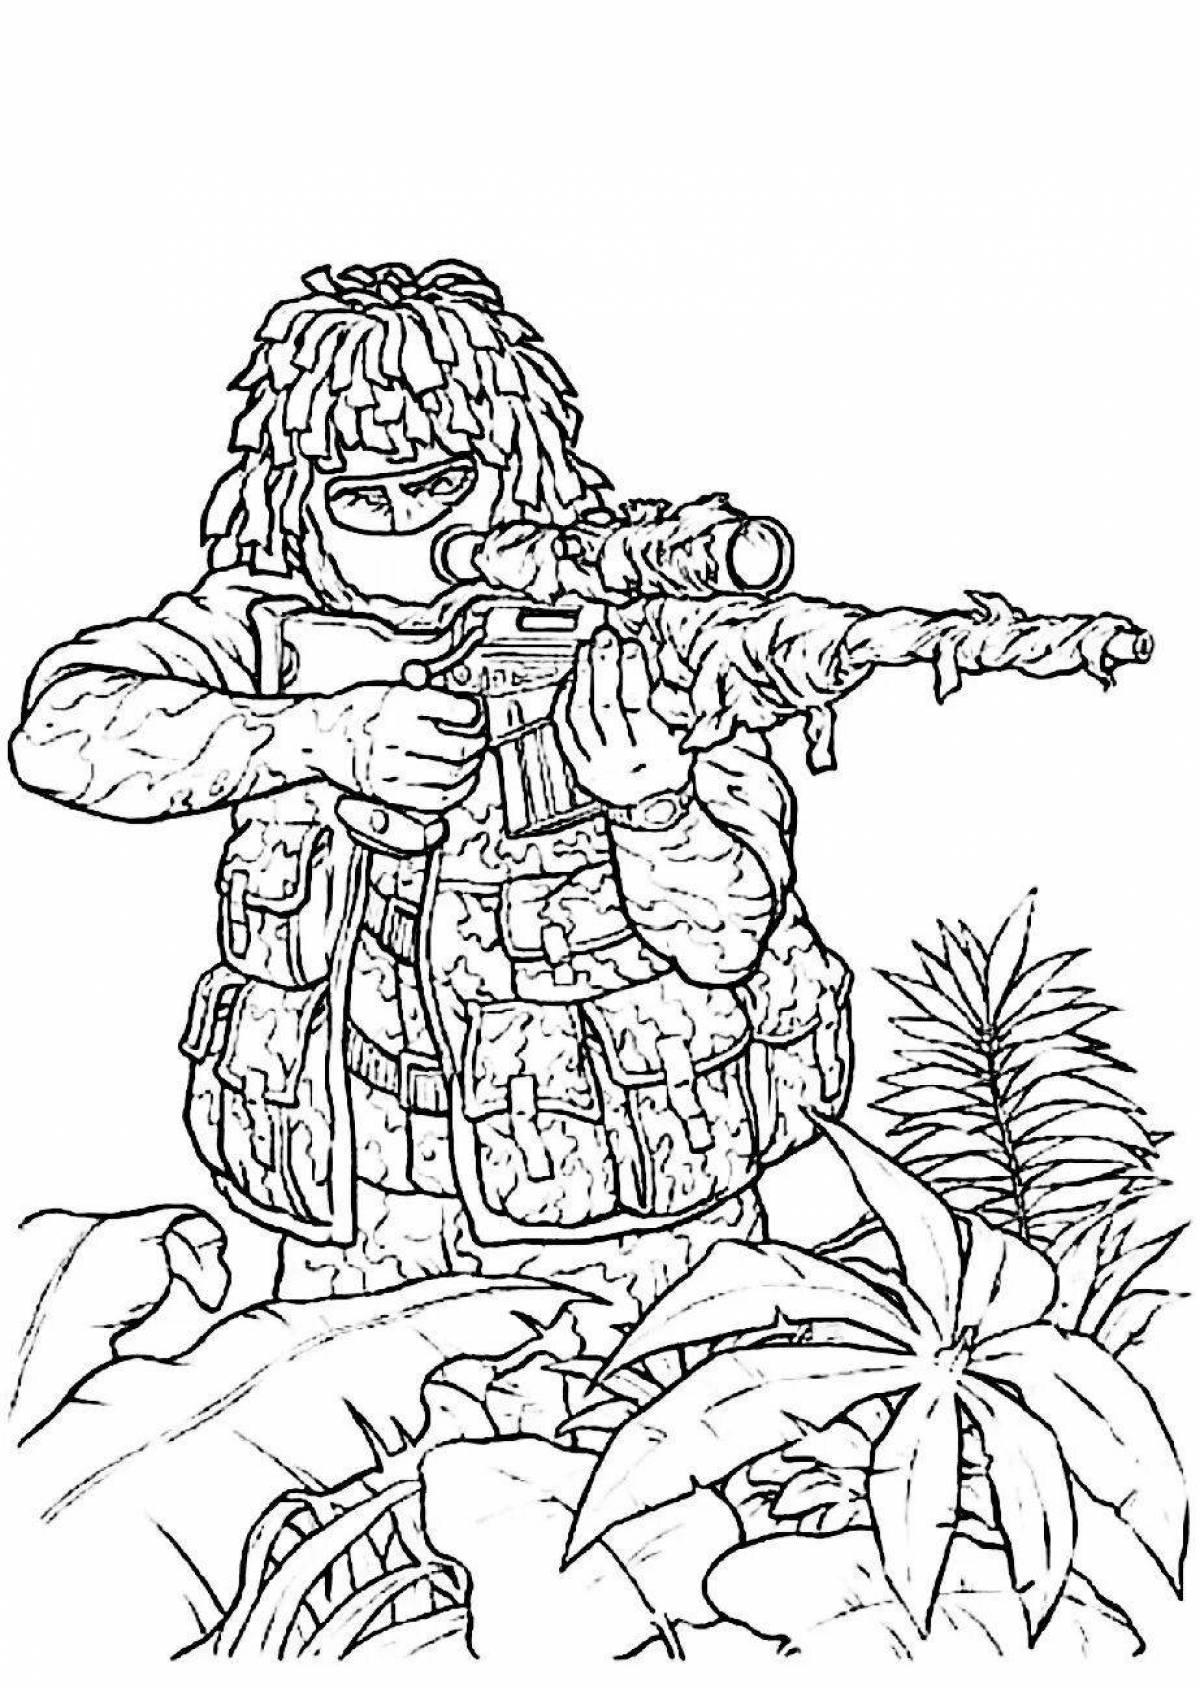 Impressive army special forces coloring page